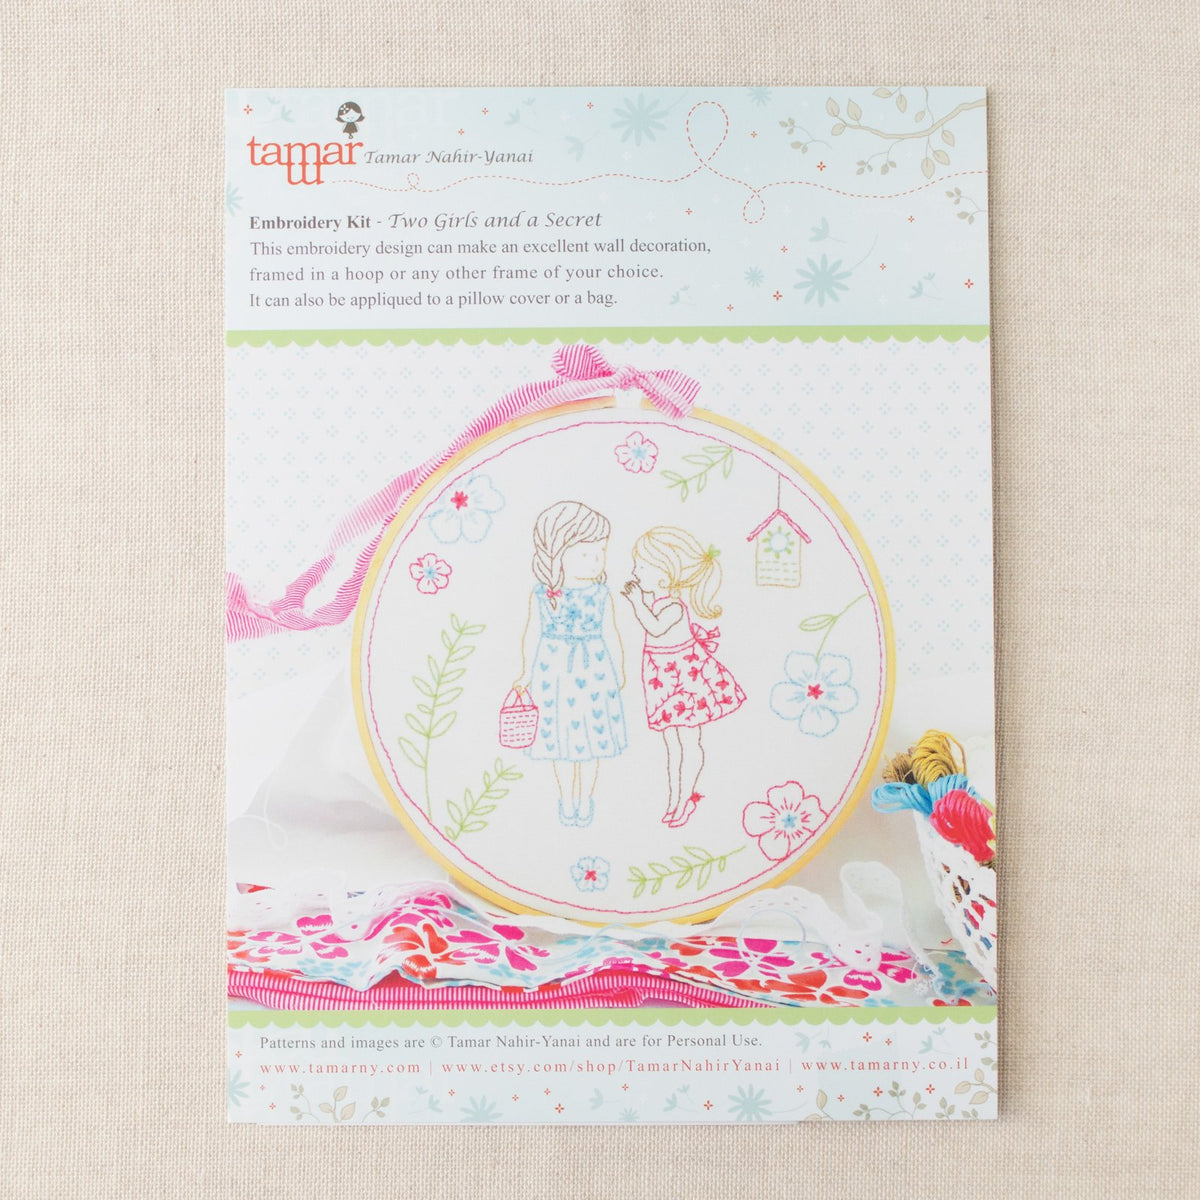 Two Girls and a Secret Hand Embroidery Kit